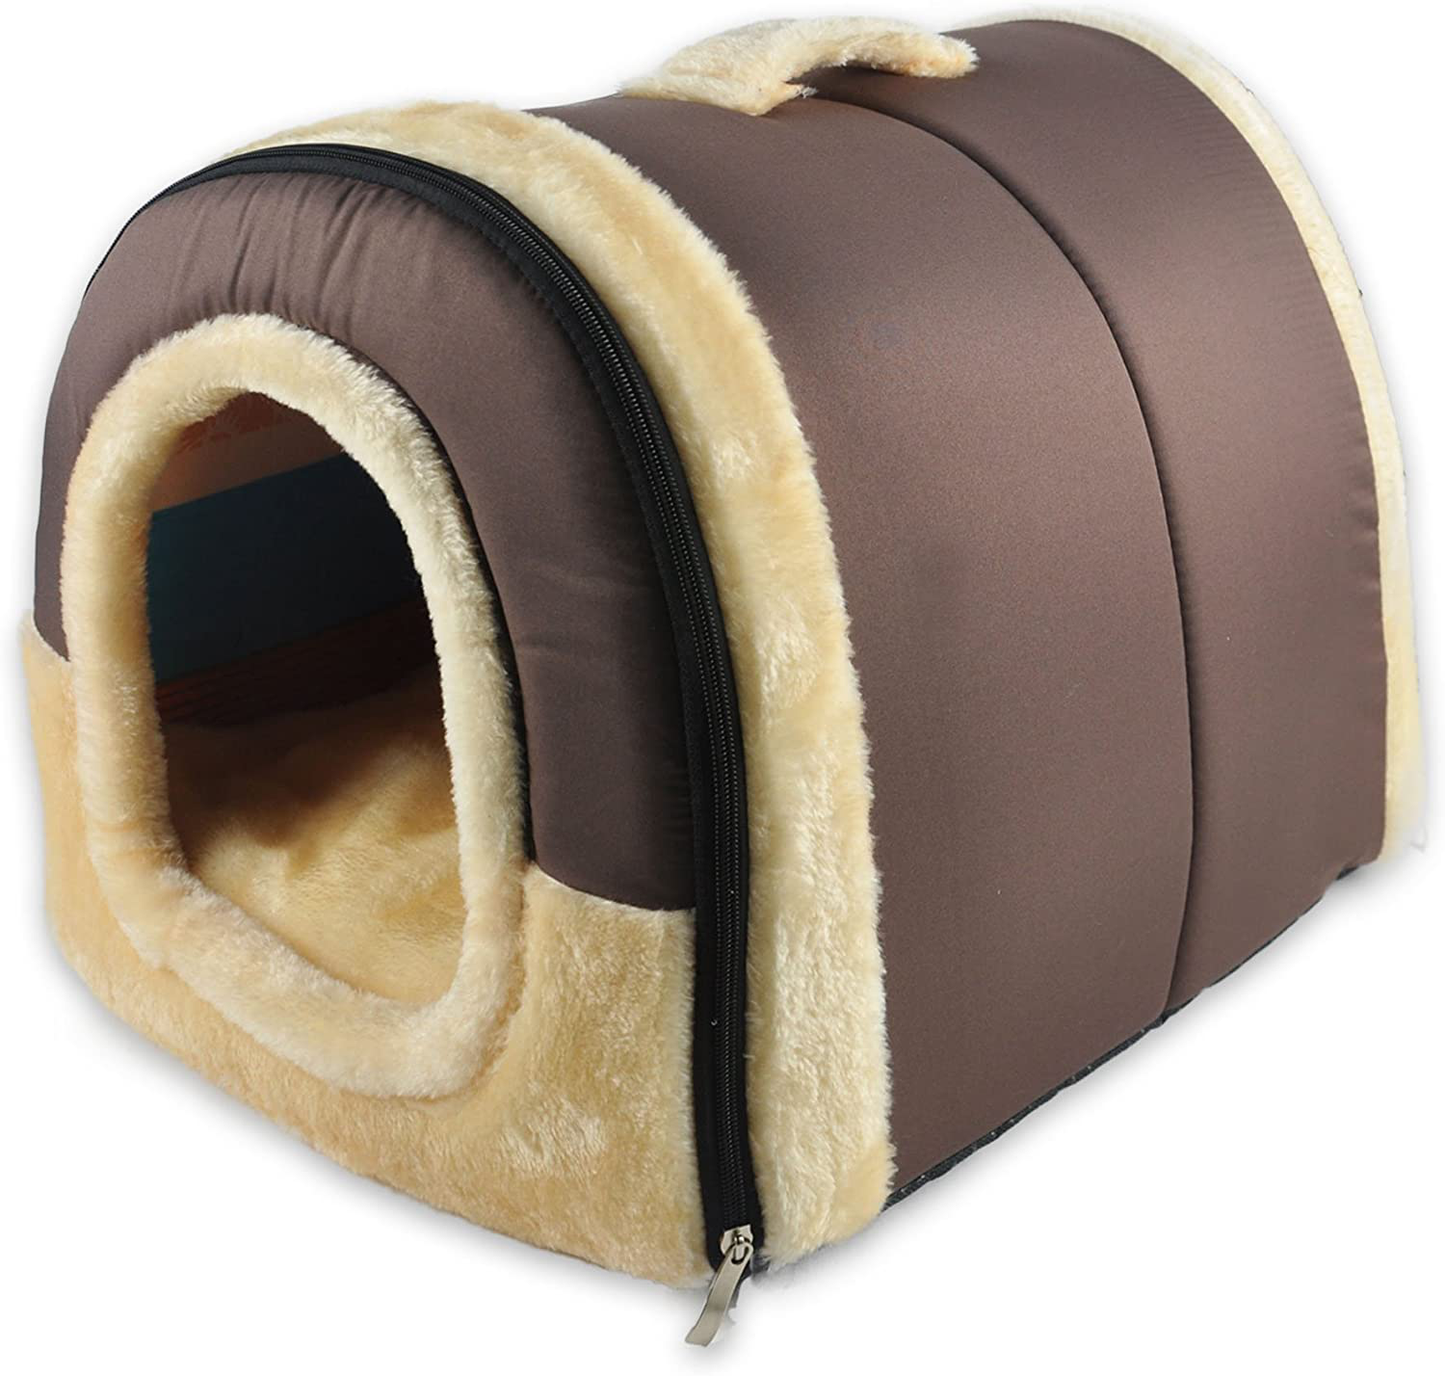 ANPPEX Indoor Dog House, Cozy Dog Cave Bed, Foldable Cat Bed Cave, Covered Dog Cat Bed Cave, Outdoor Igloo Dog Bed House